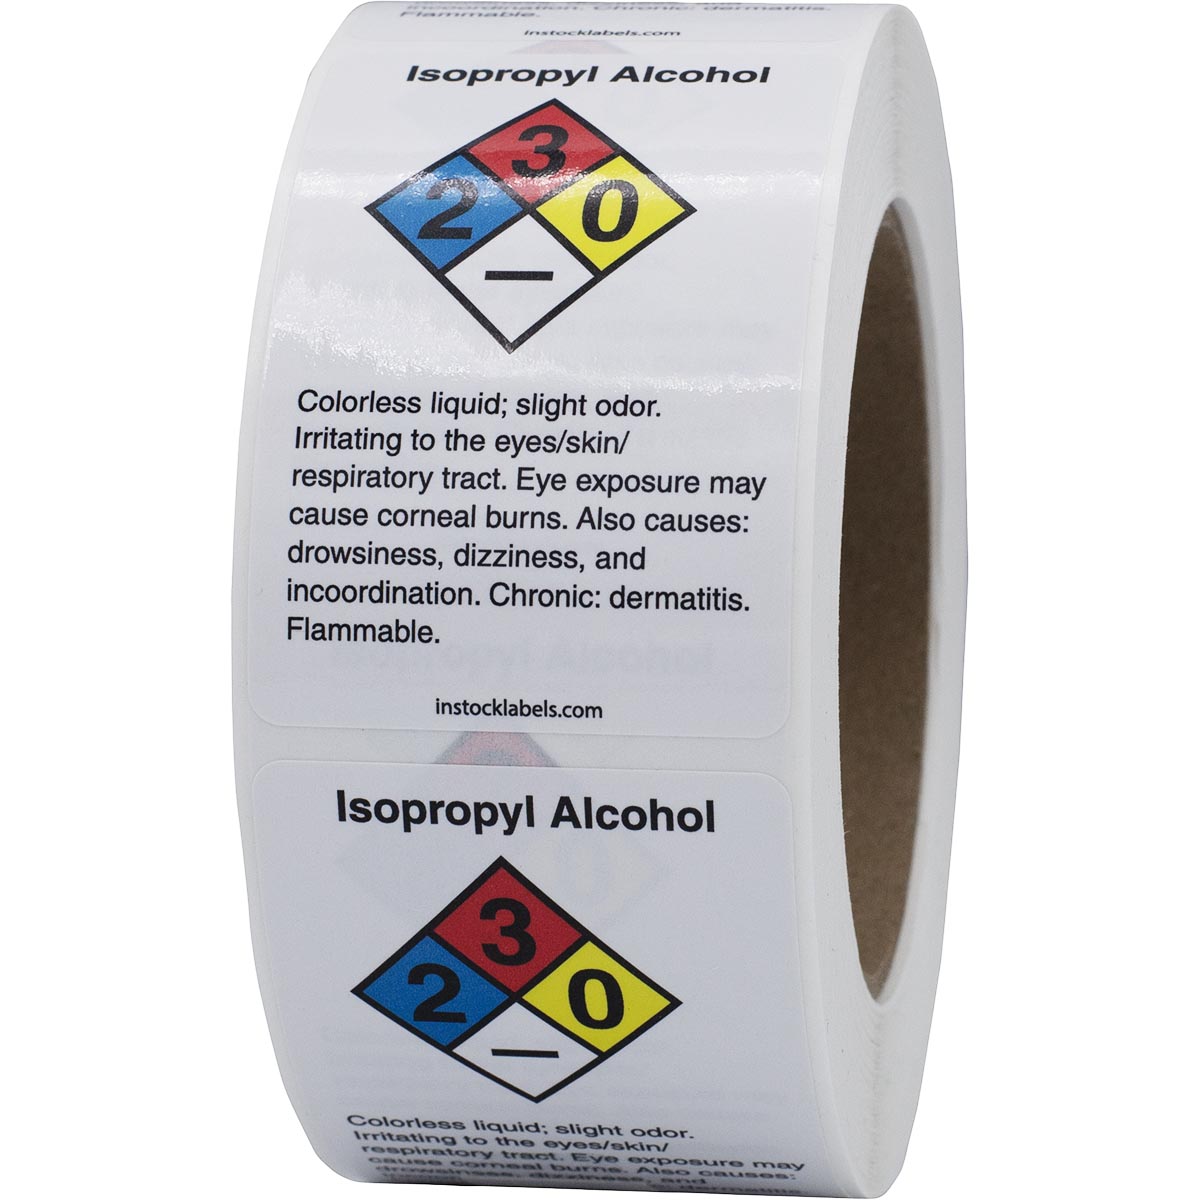 Ten Uses For Isopropyl Alcohol